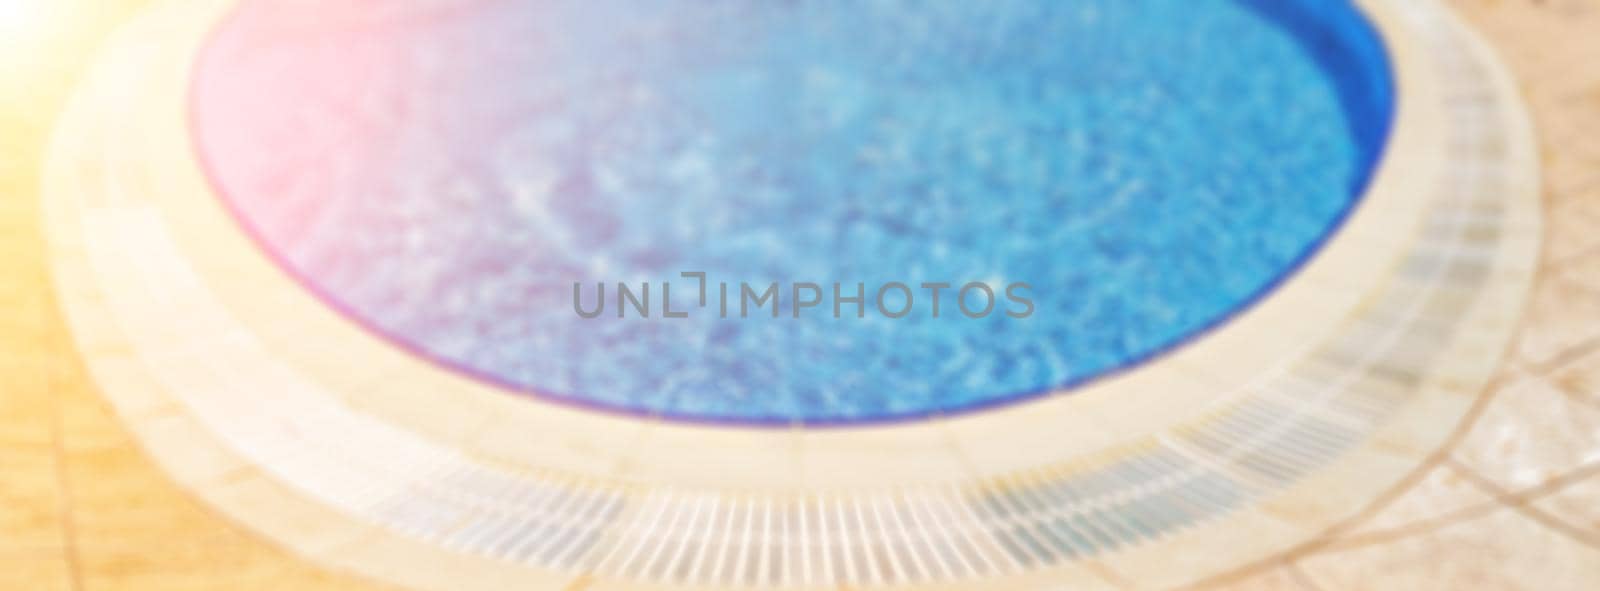 Abstract defocused pool with blue water background. Panorama of pool bottom with tile pattern and transparent water. Summer travel and vacation background concept by panophotograph